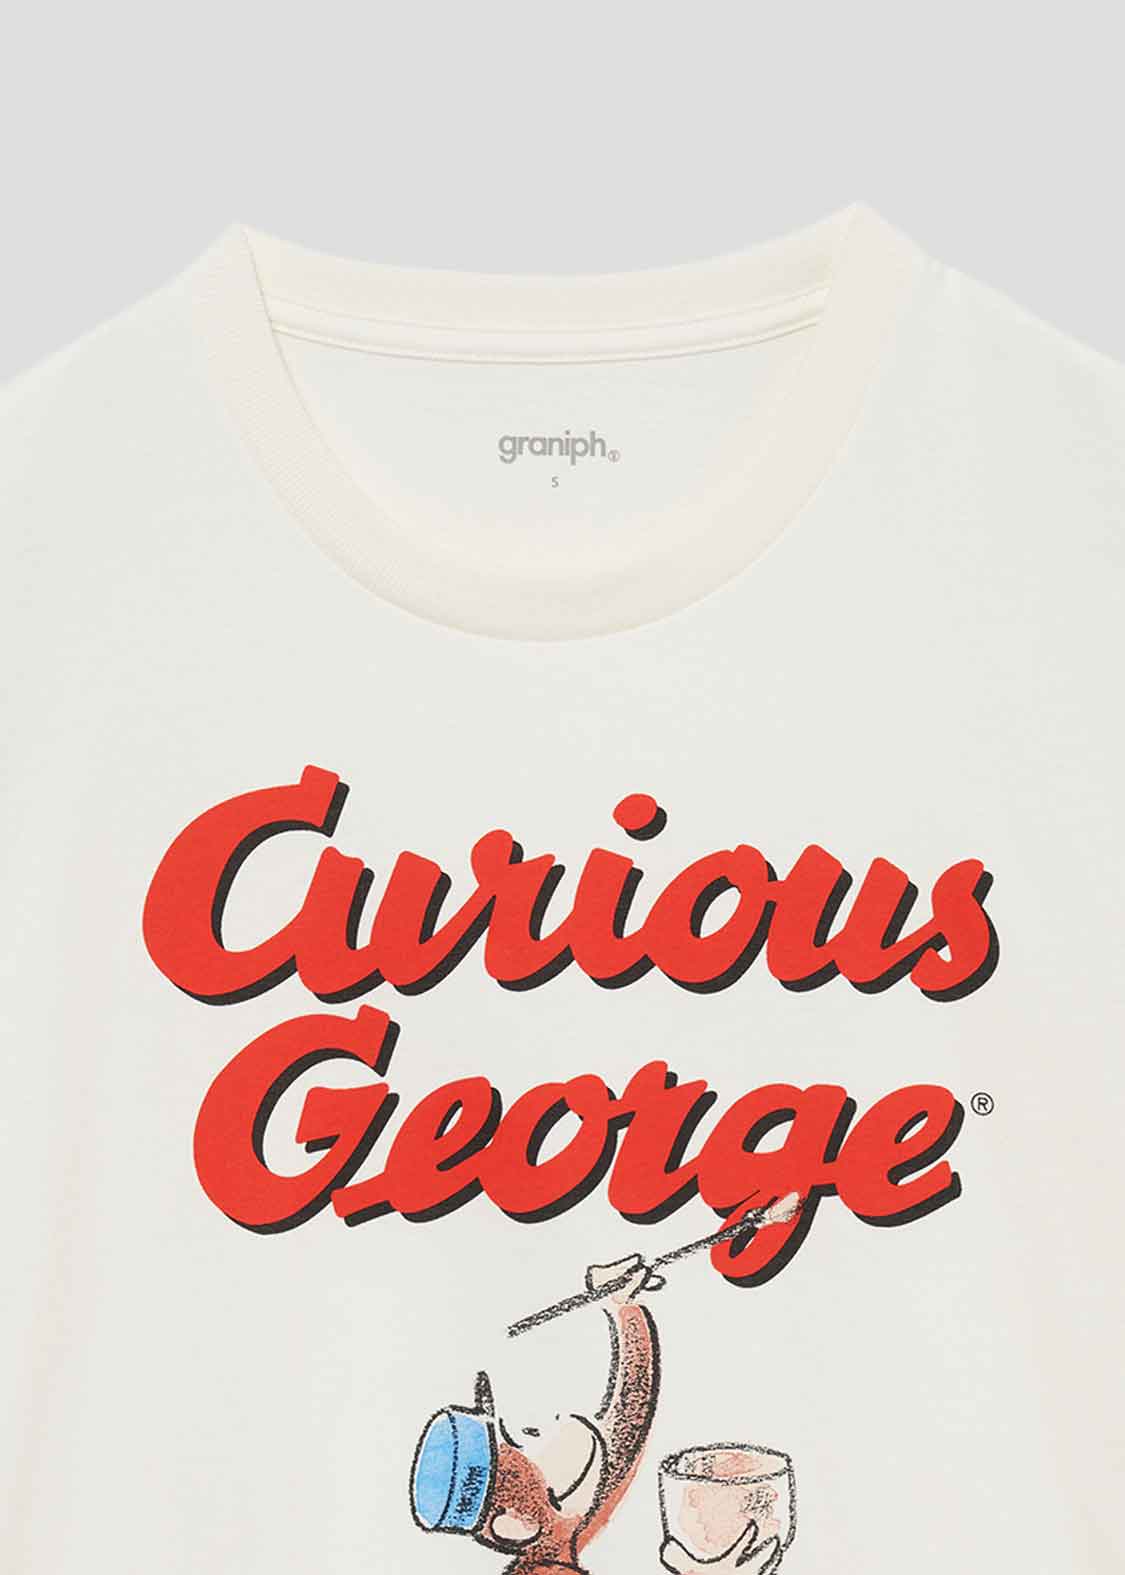 Curious George_Painting Logo